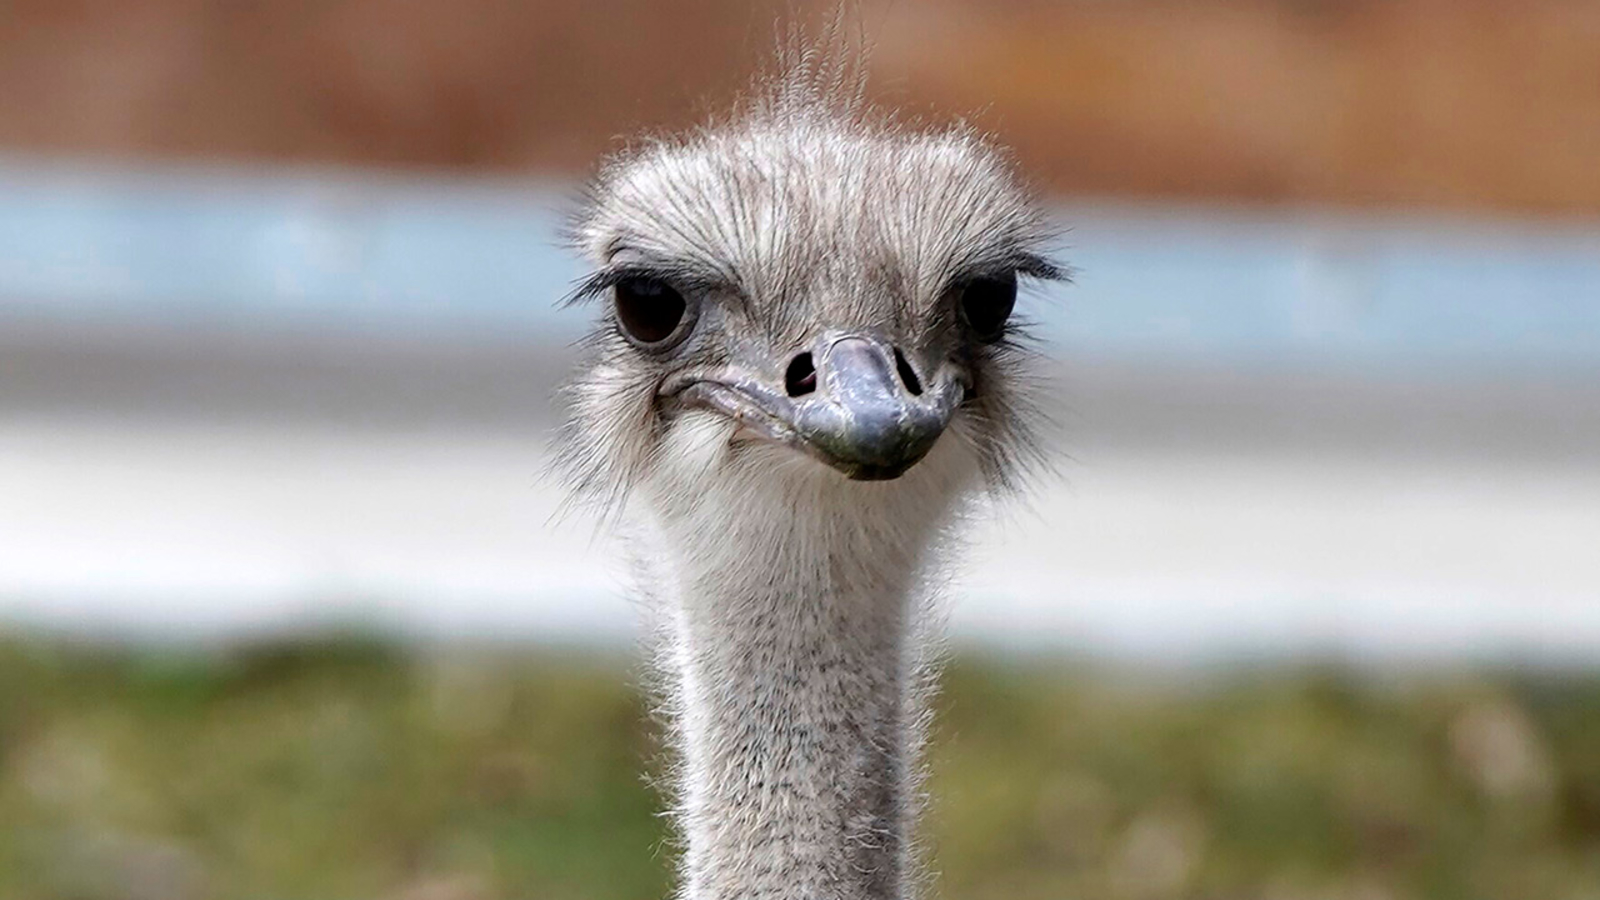 An adored ostrich at a Kansas zoo has died after swallowing a staff member’s keys [Video]